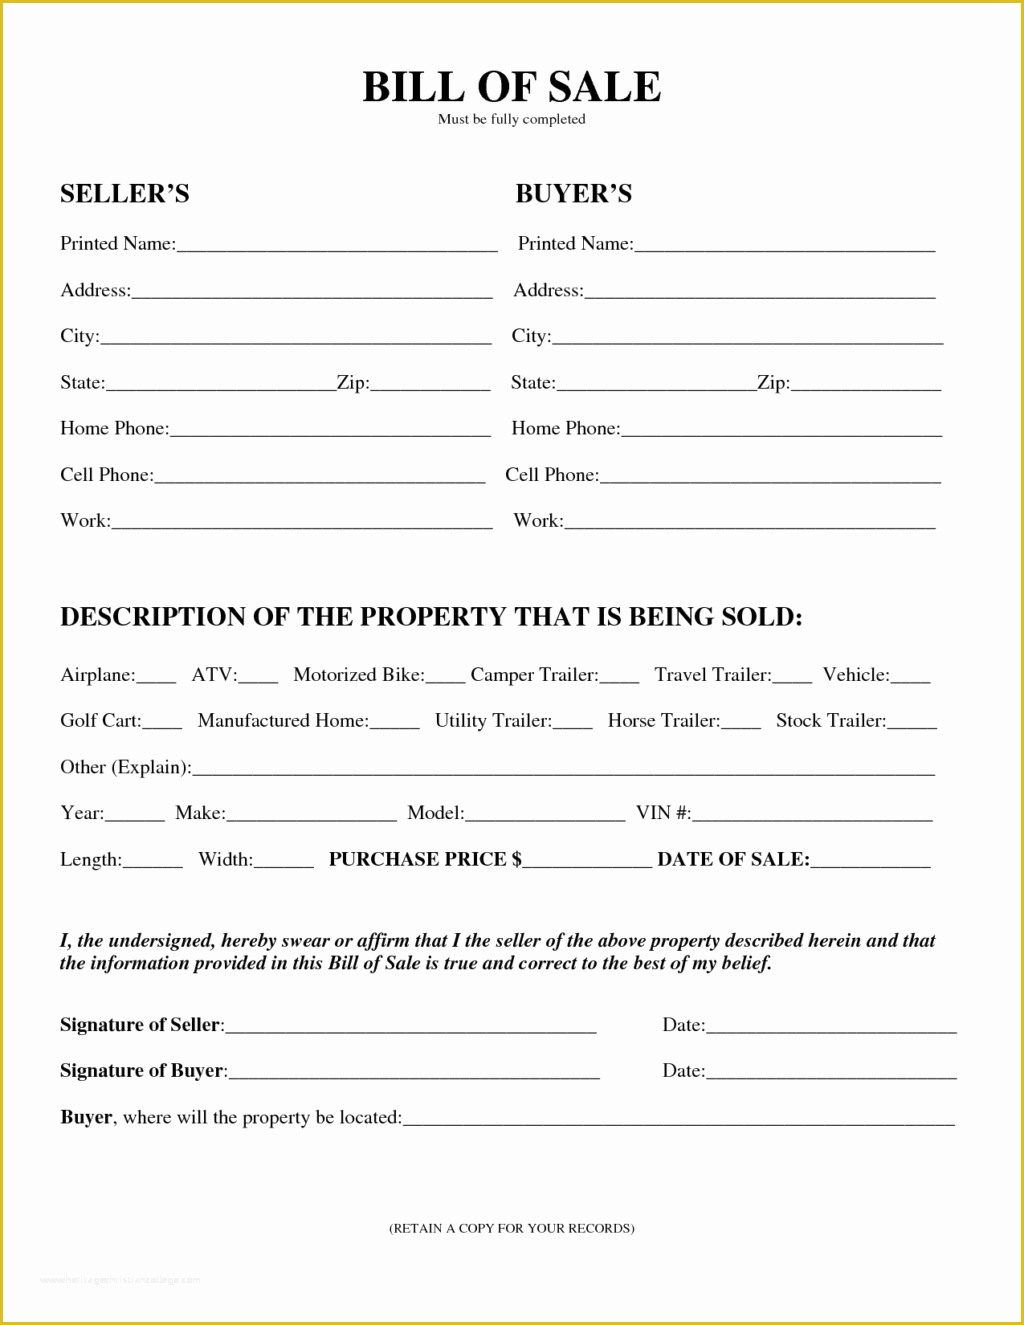 Bill Of Sale Free Template form Of Editable General Bill Sale Template form for Selling